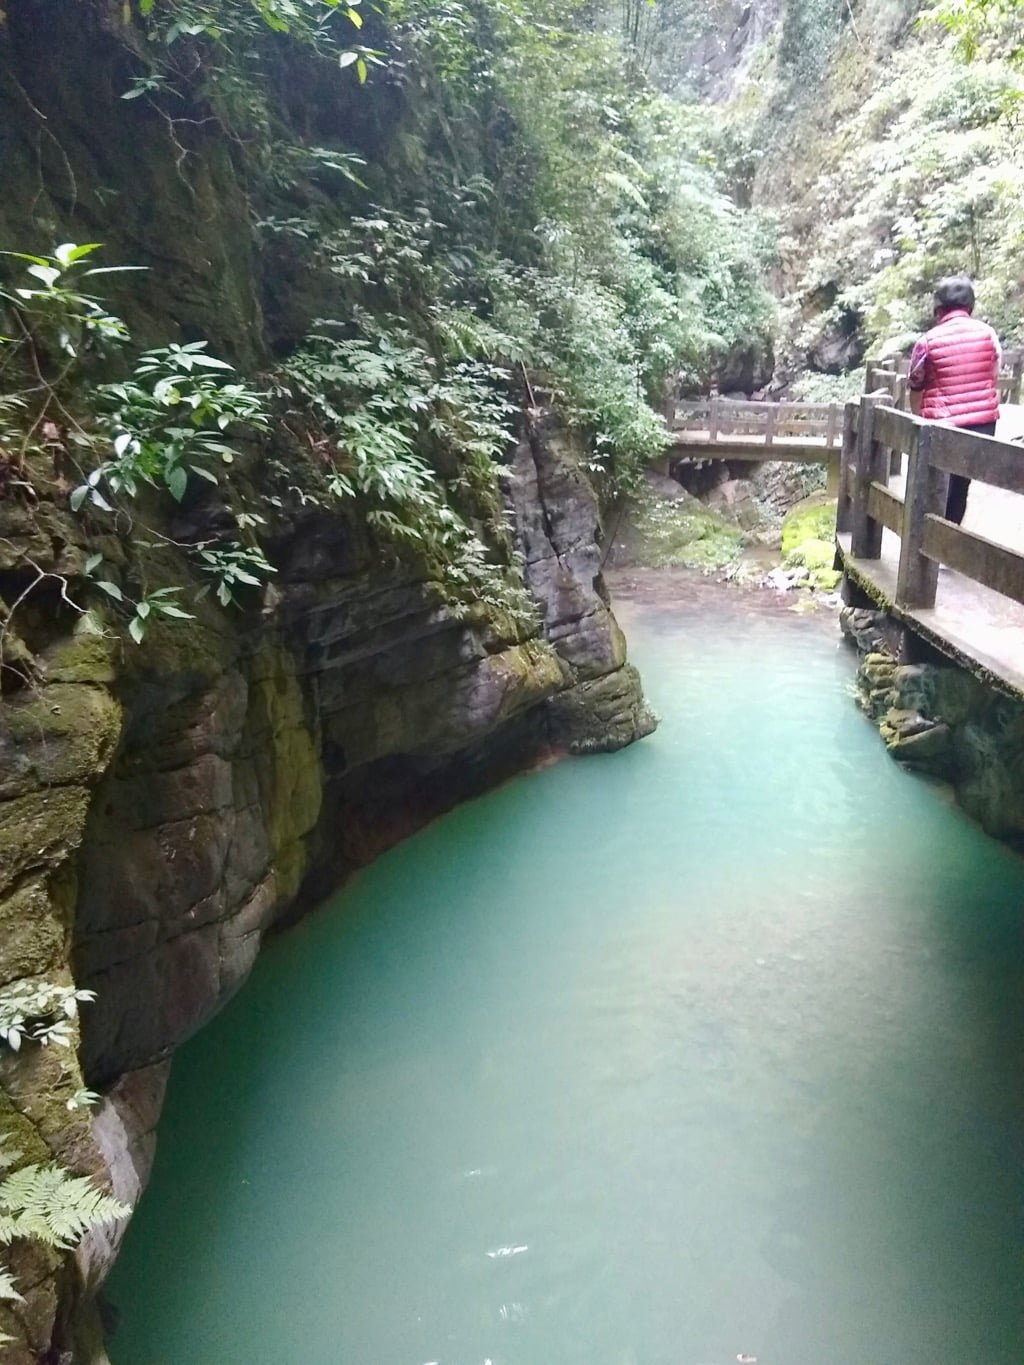 Beautiful turquoise water at Longhshui Gorge, a must-see attraction in Wulong, China